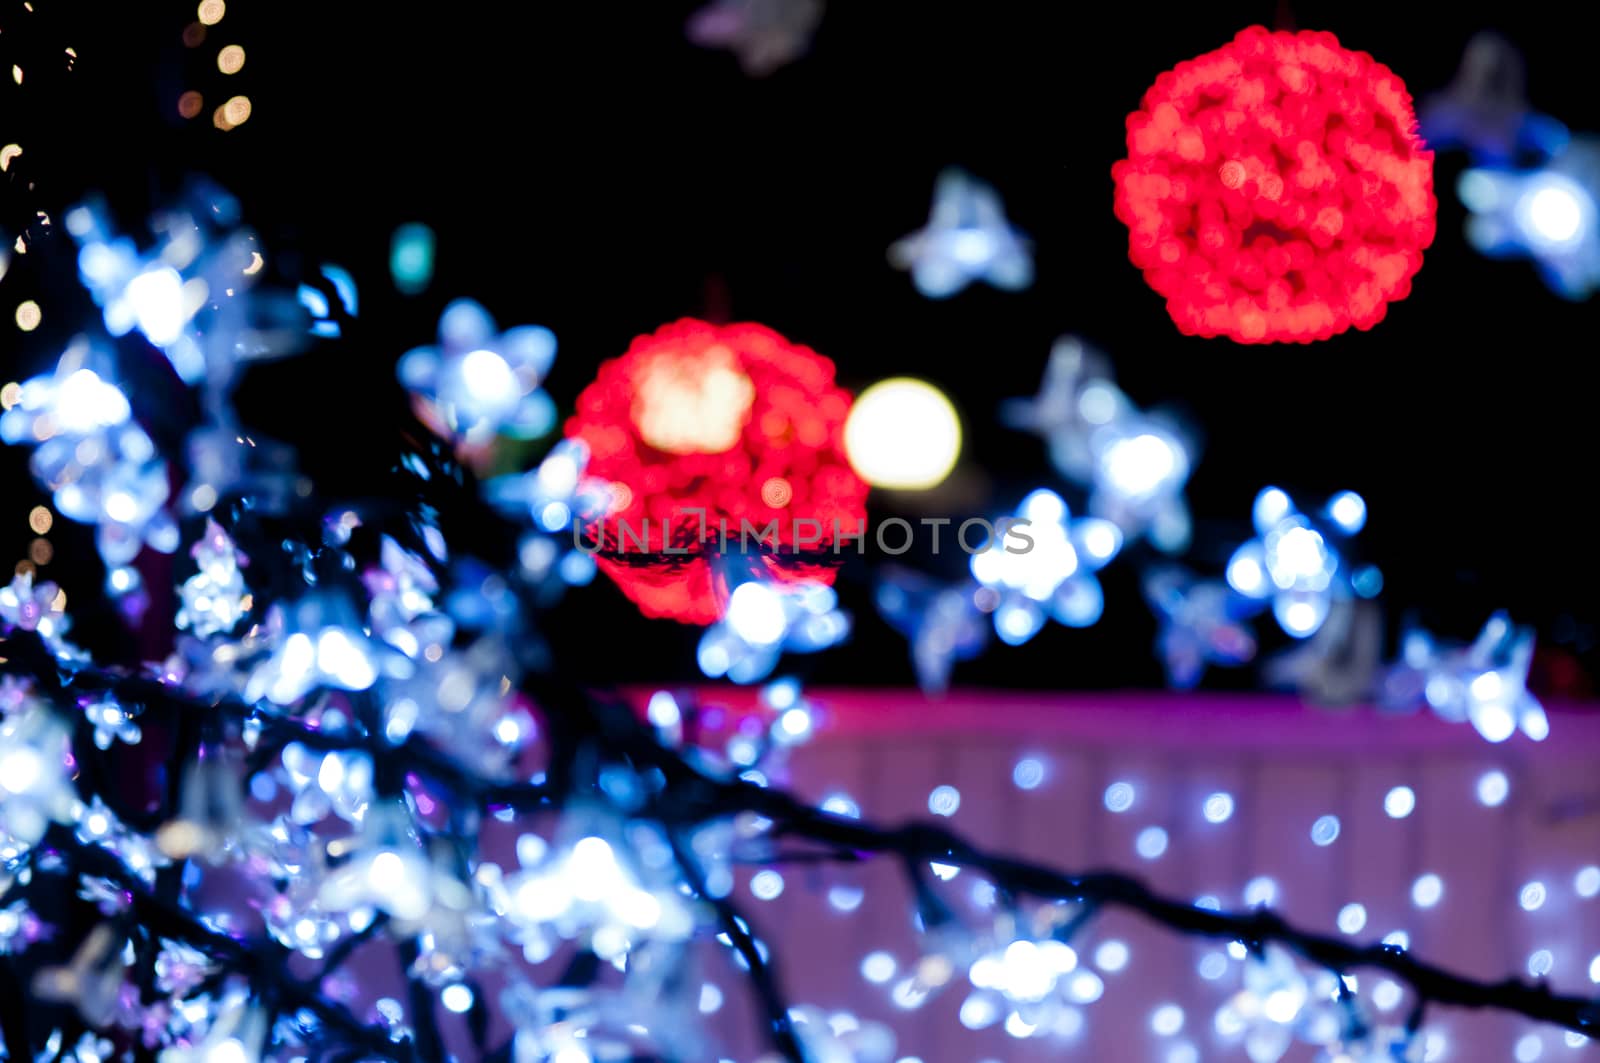 blury red light balls and white lights in forground